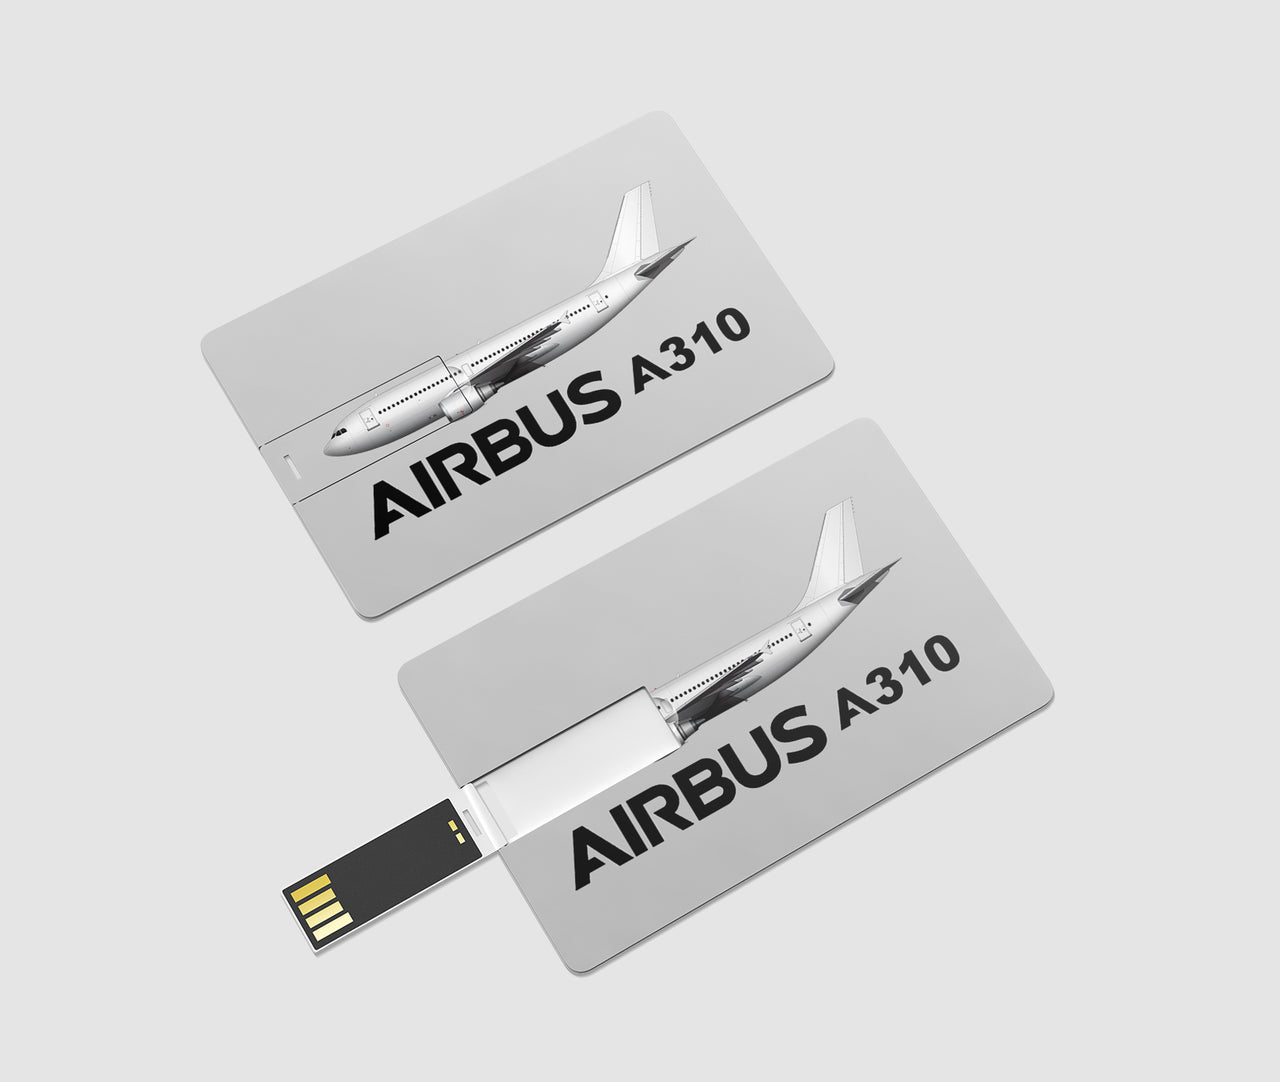 The Airbus A310 Designed USB Cards